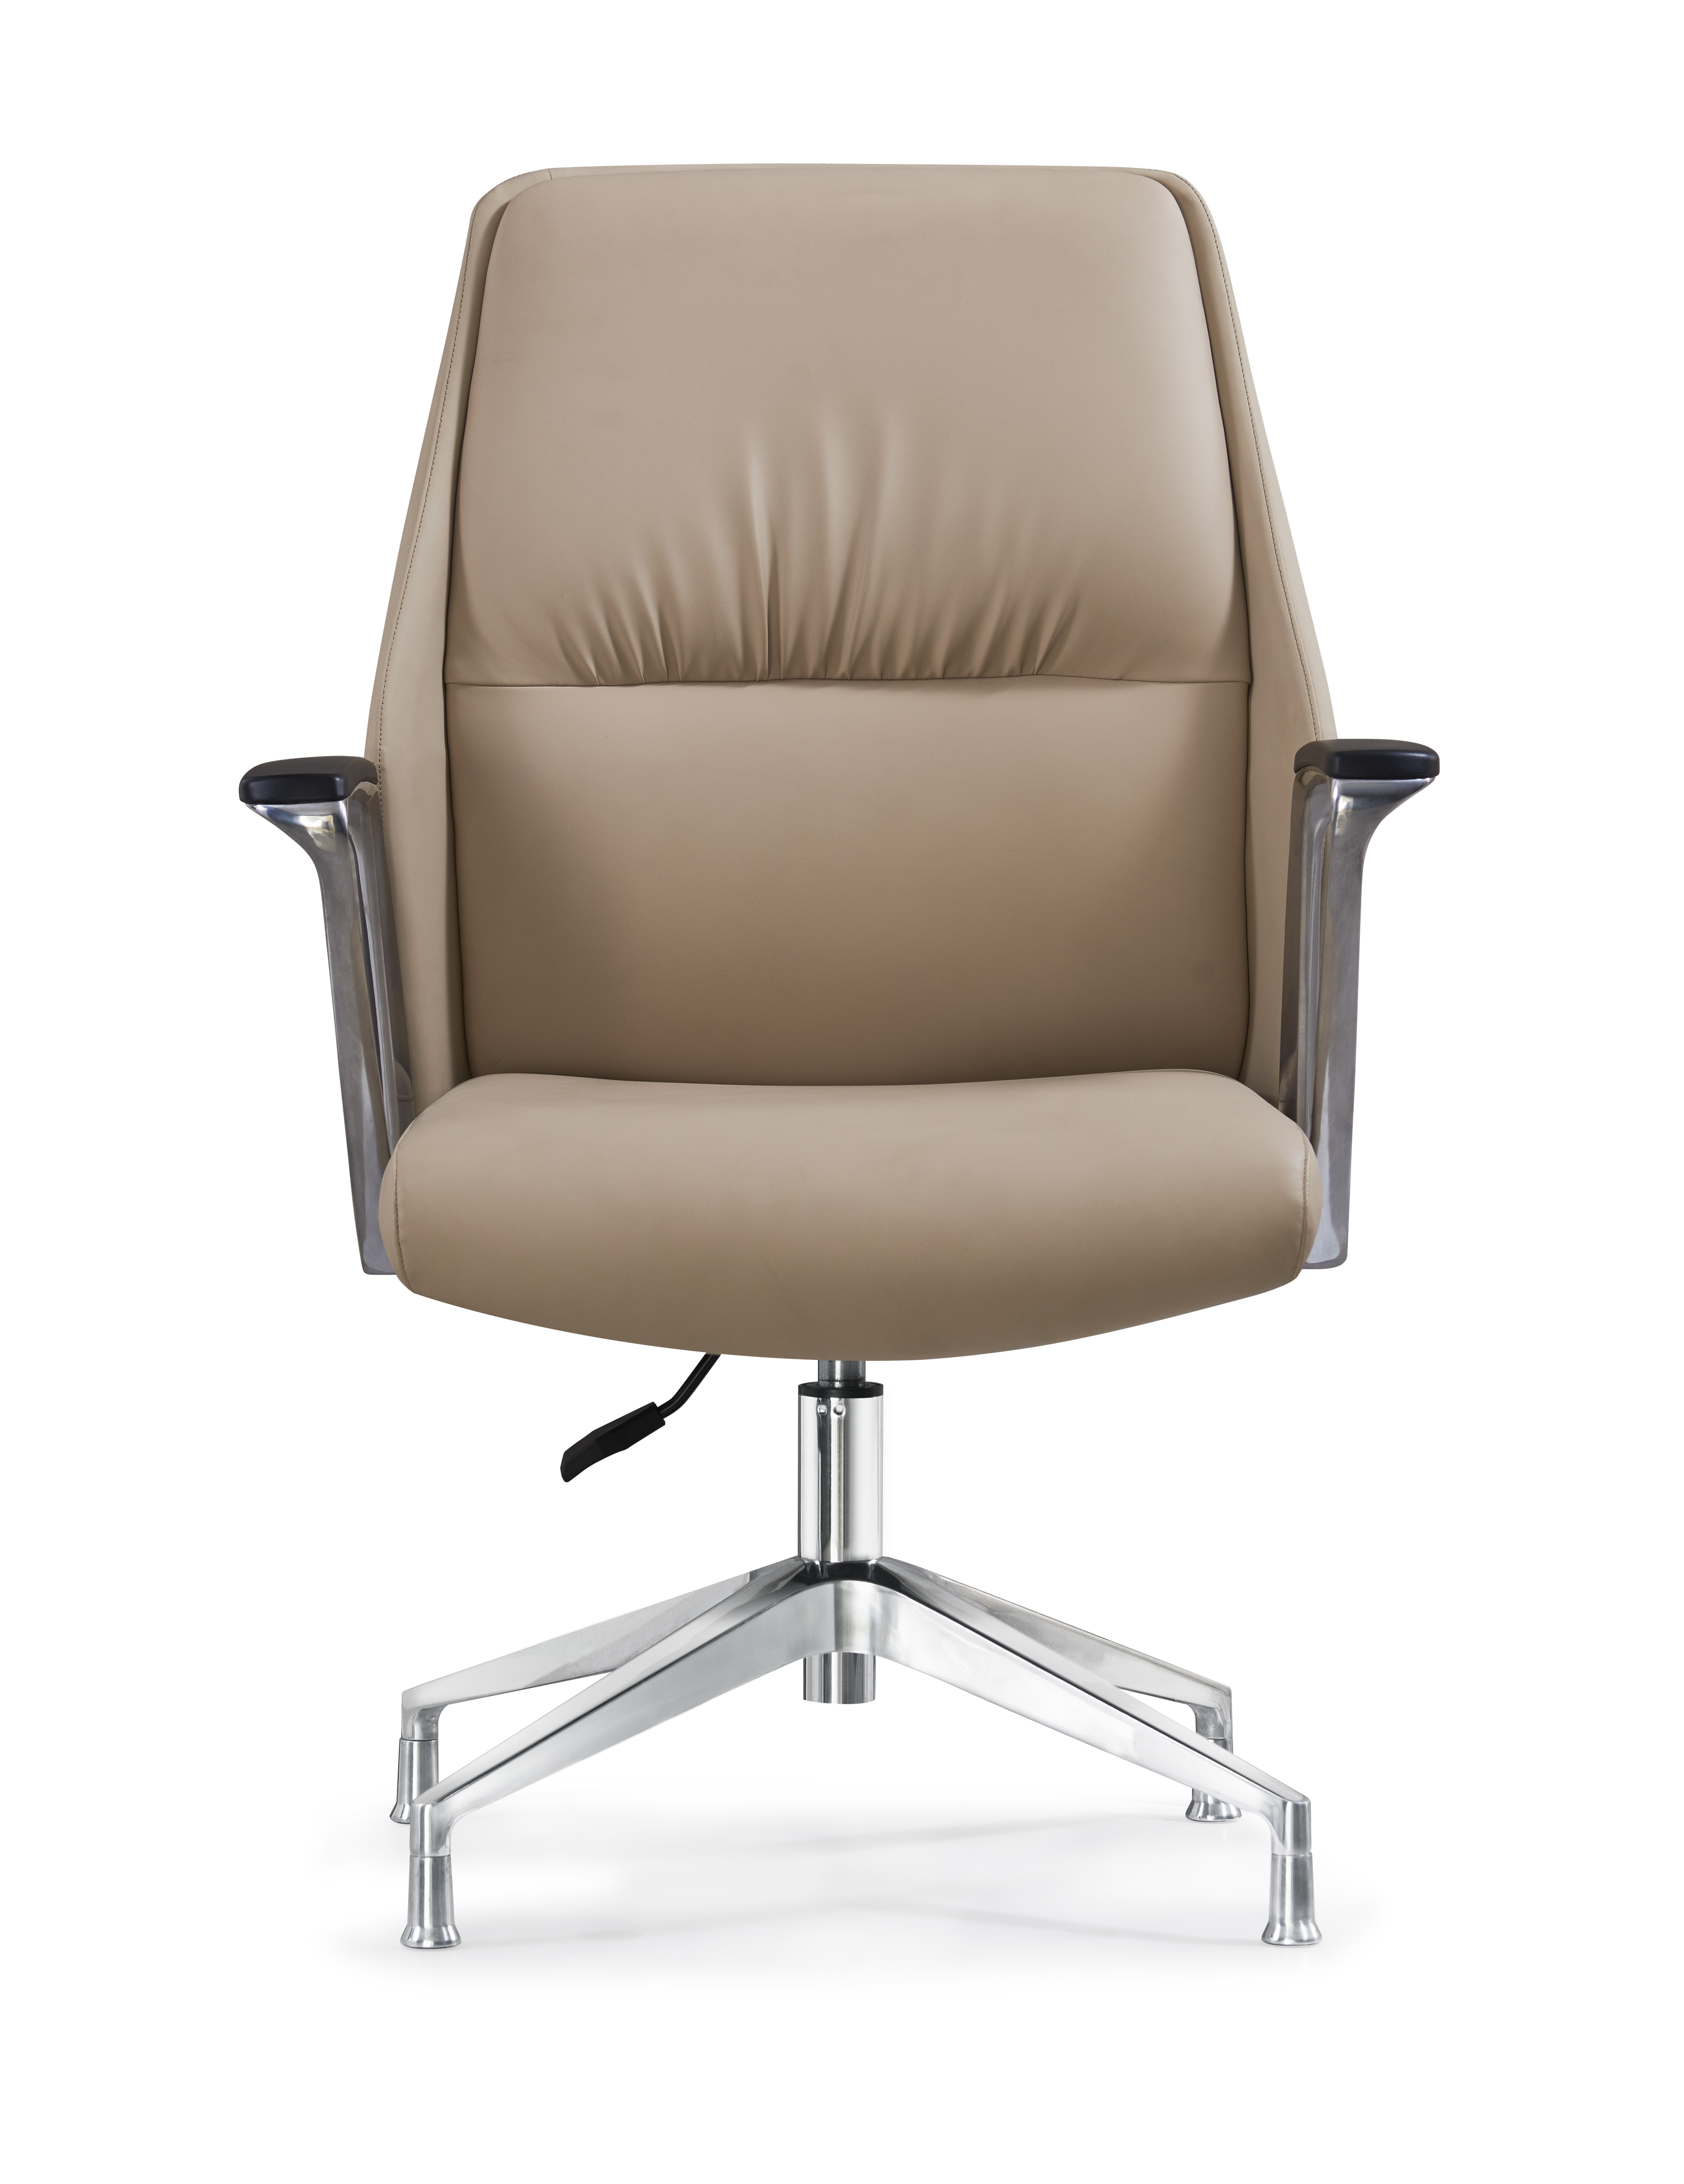 Fixed leg Low Back Office Chair